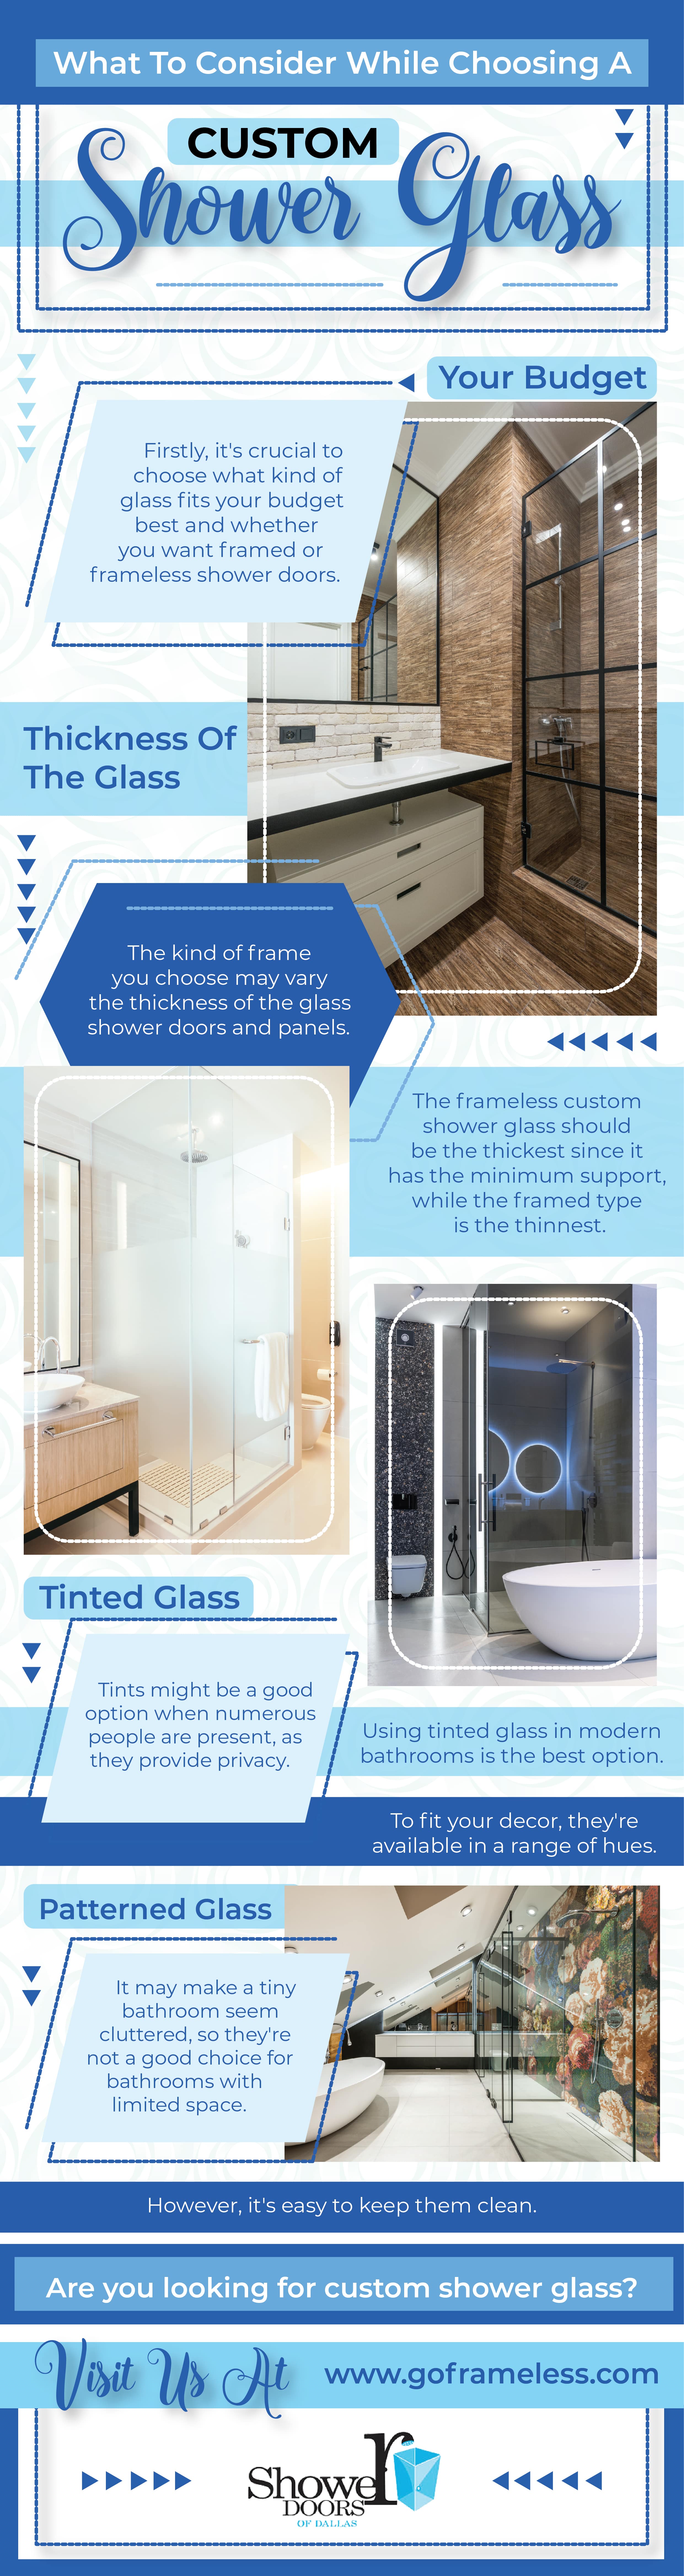 things to consider when choosing a custom shower glass